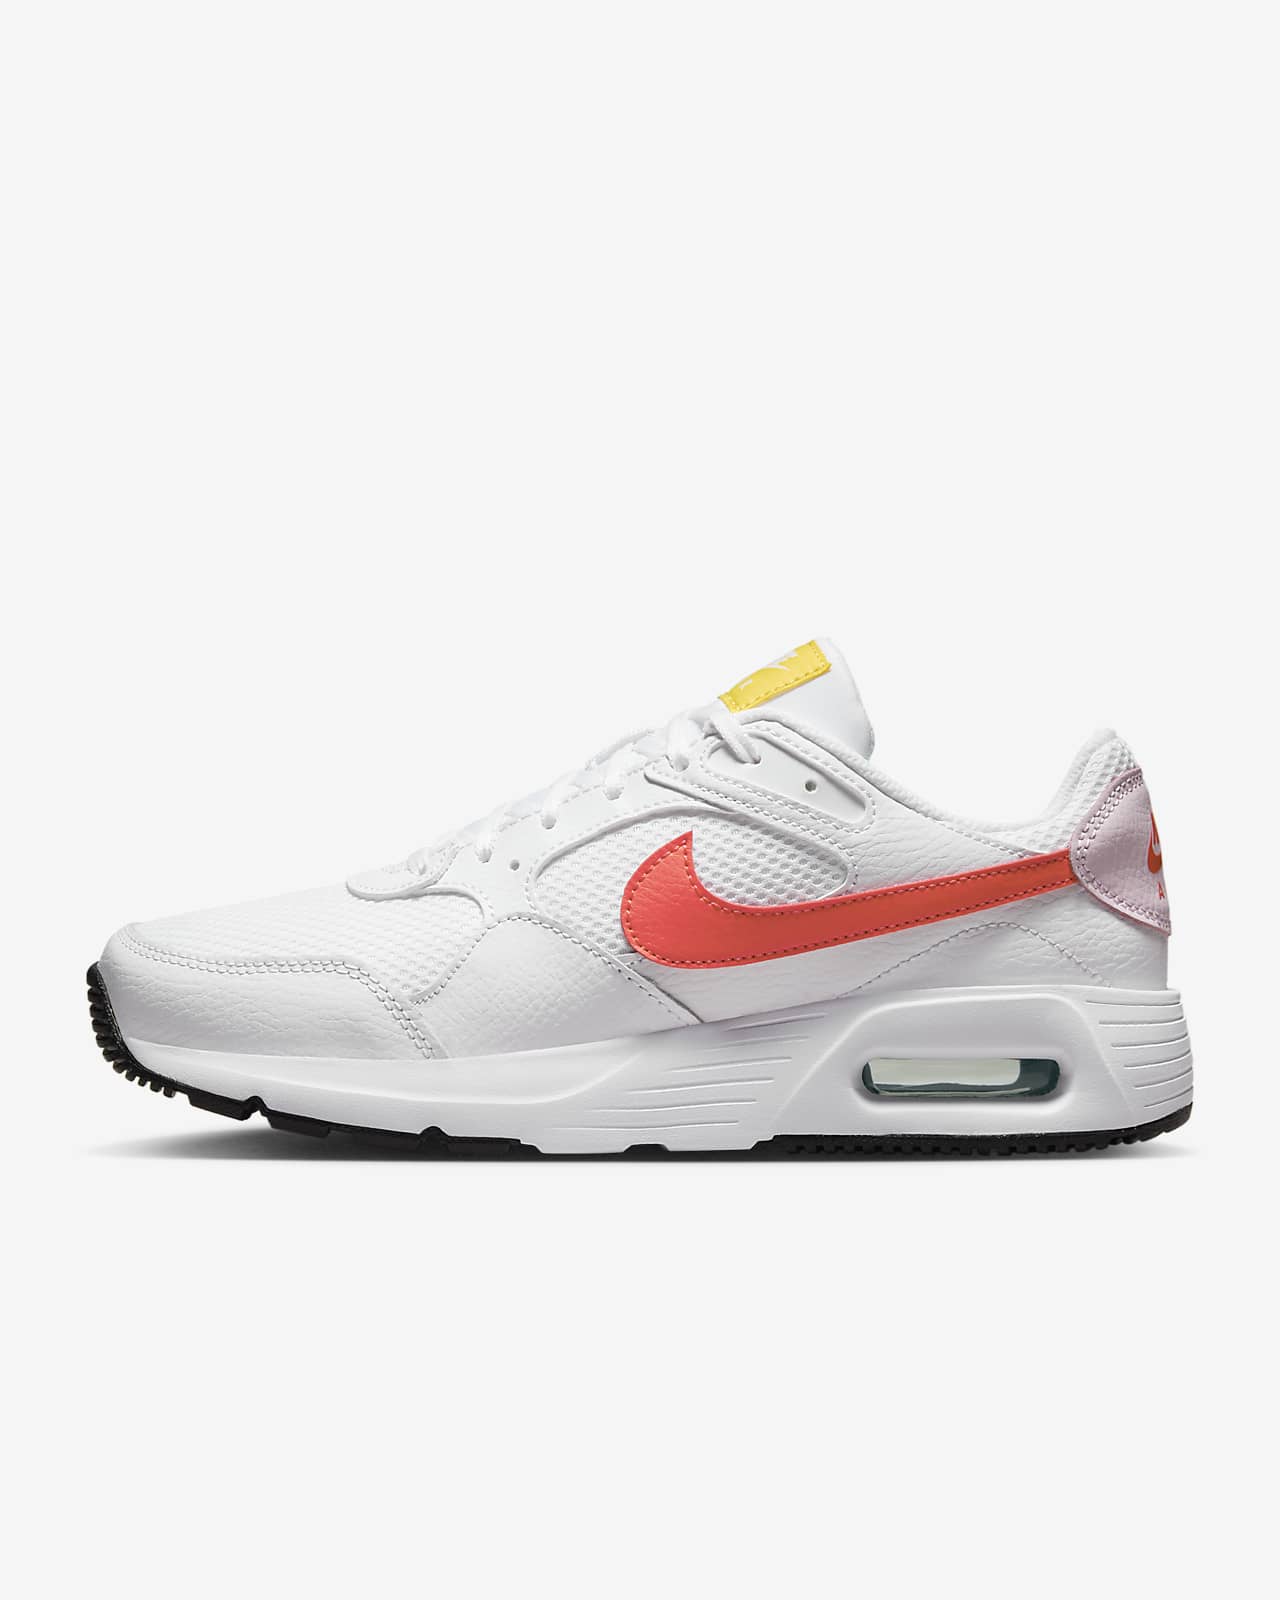 Air Max 90 Futura Womens | Sneakers | Stirling Sports